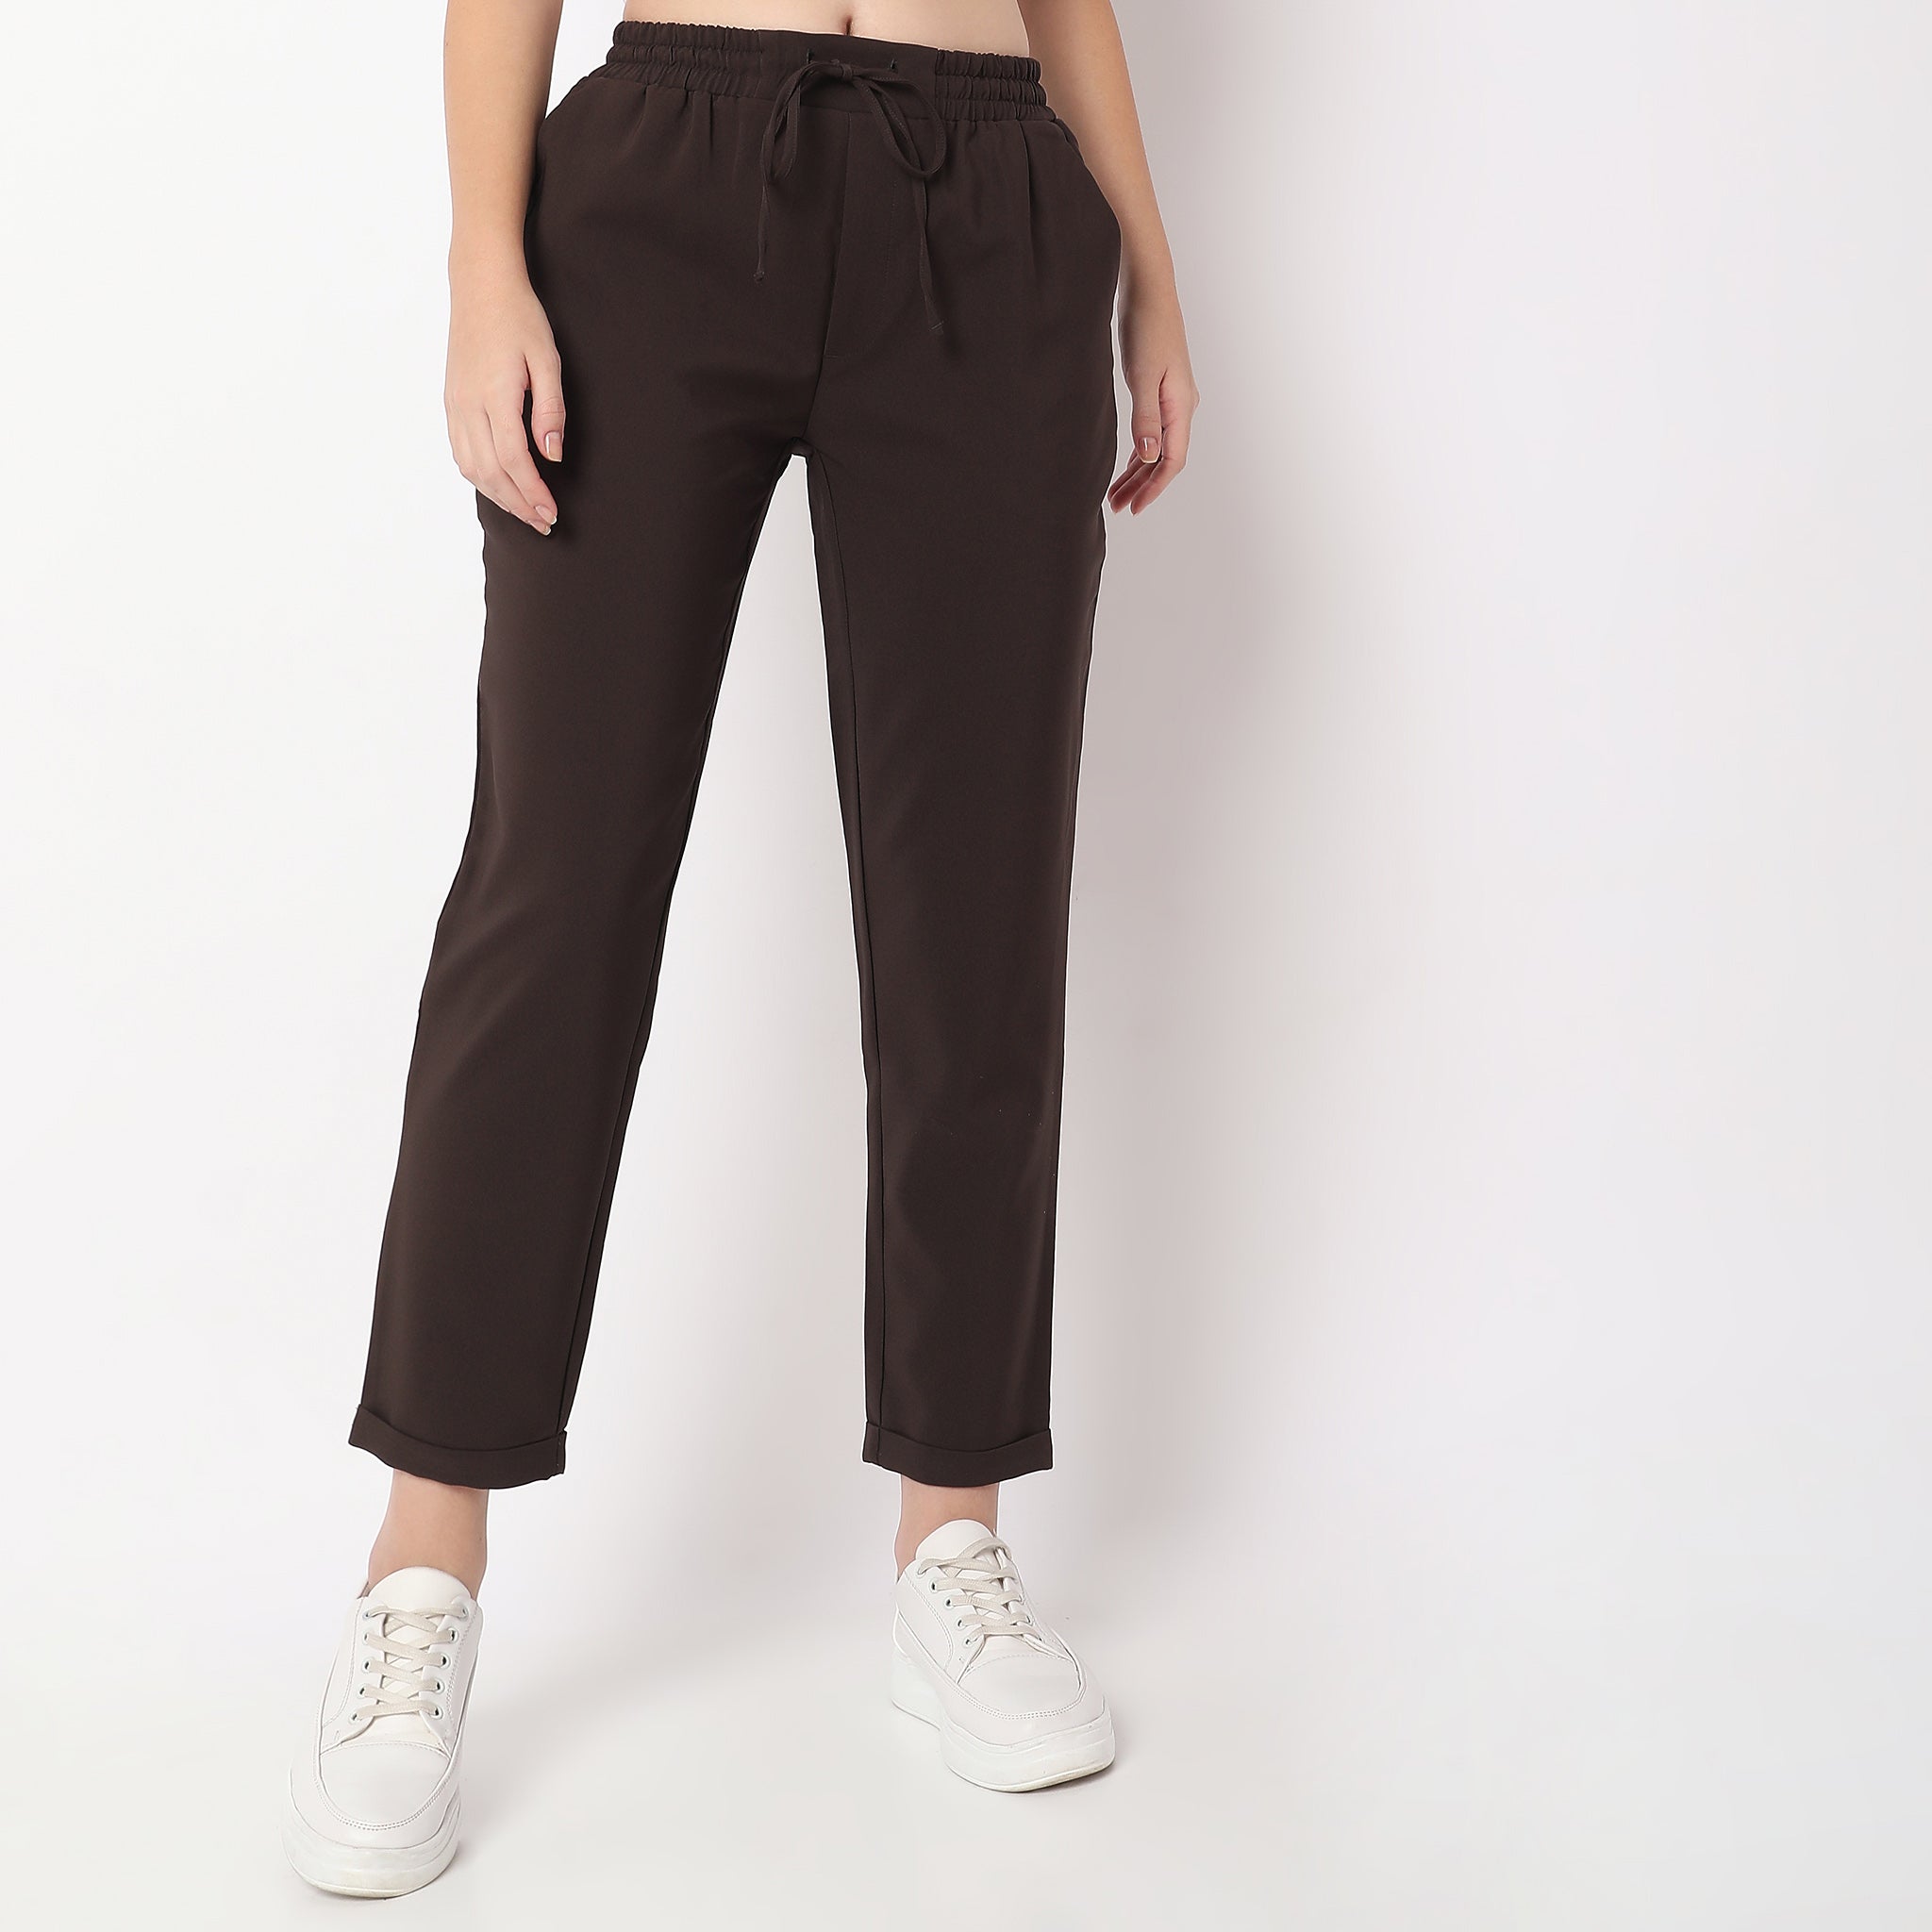 Khaki Trousers - Tapered Trousers - Office Chic Trousers - Lulus